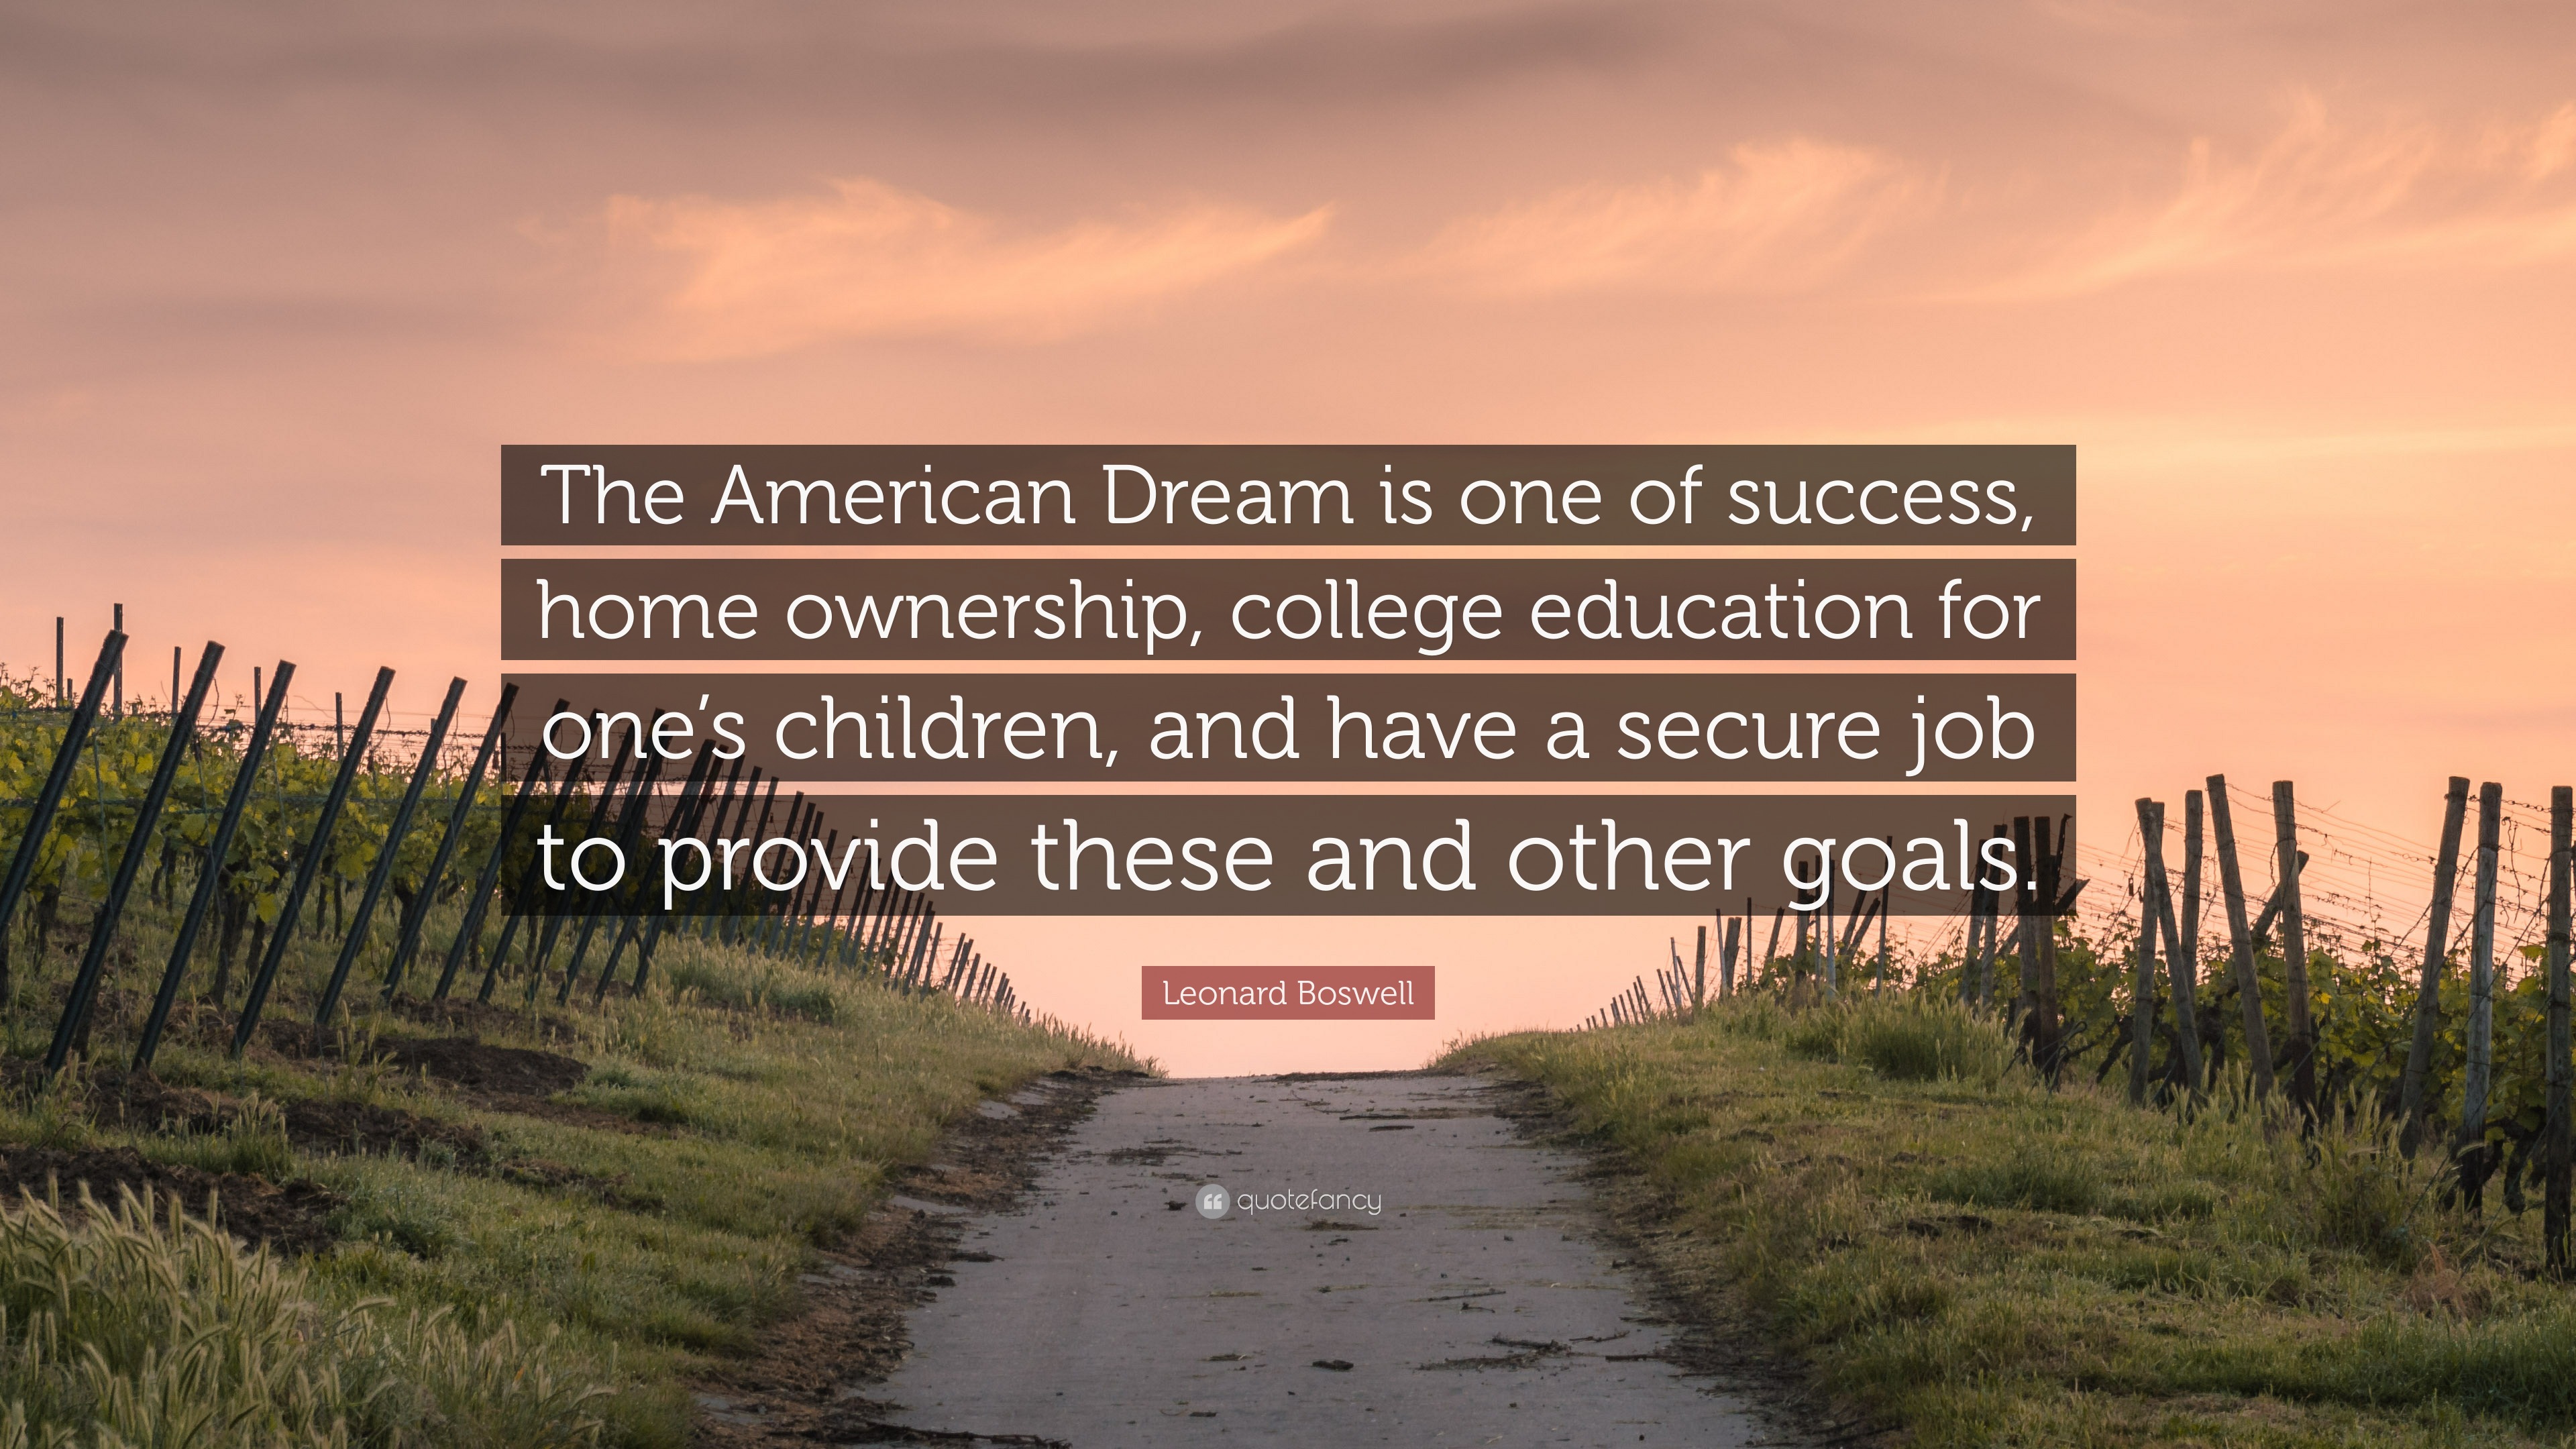 a thesis statement about the american dream